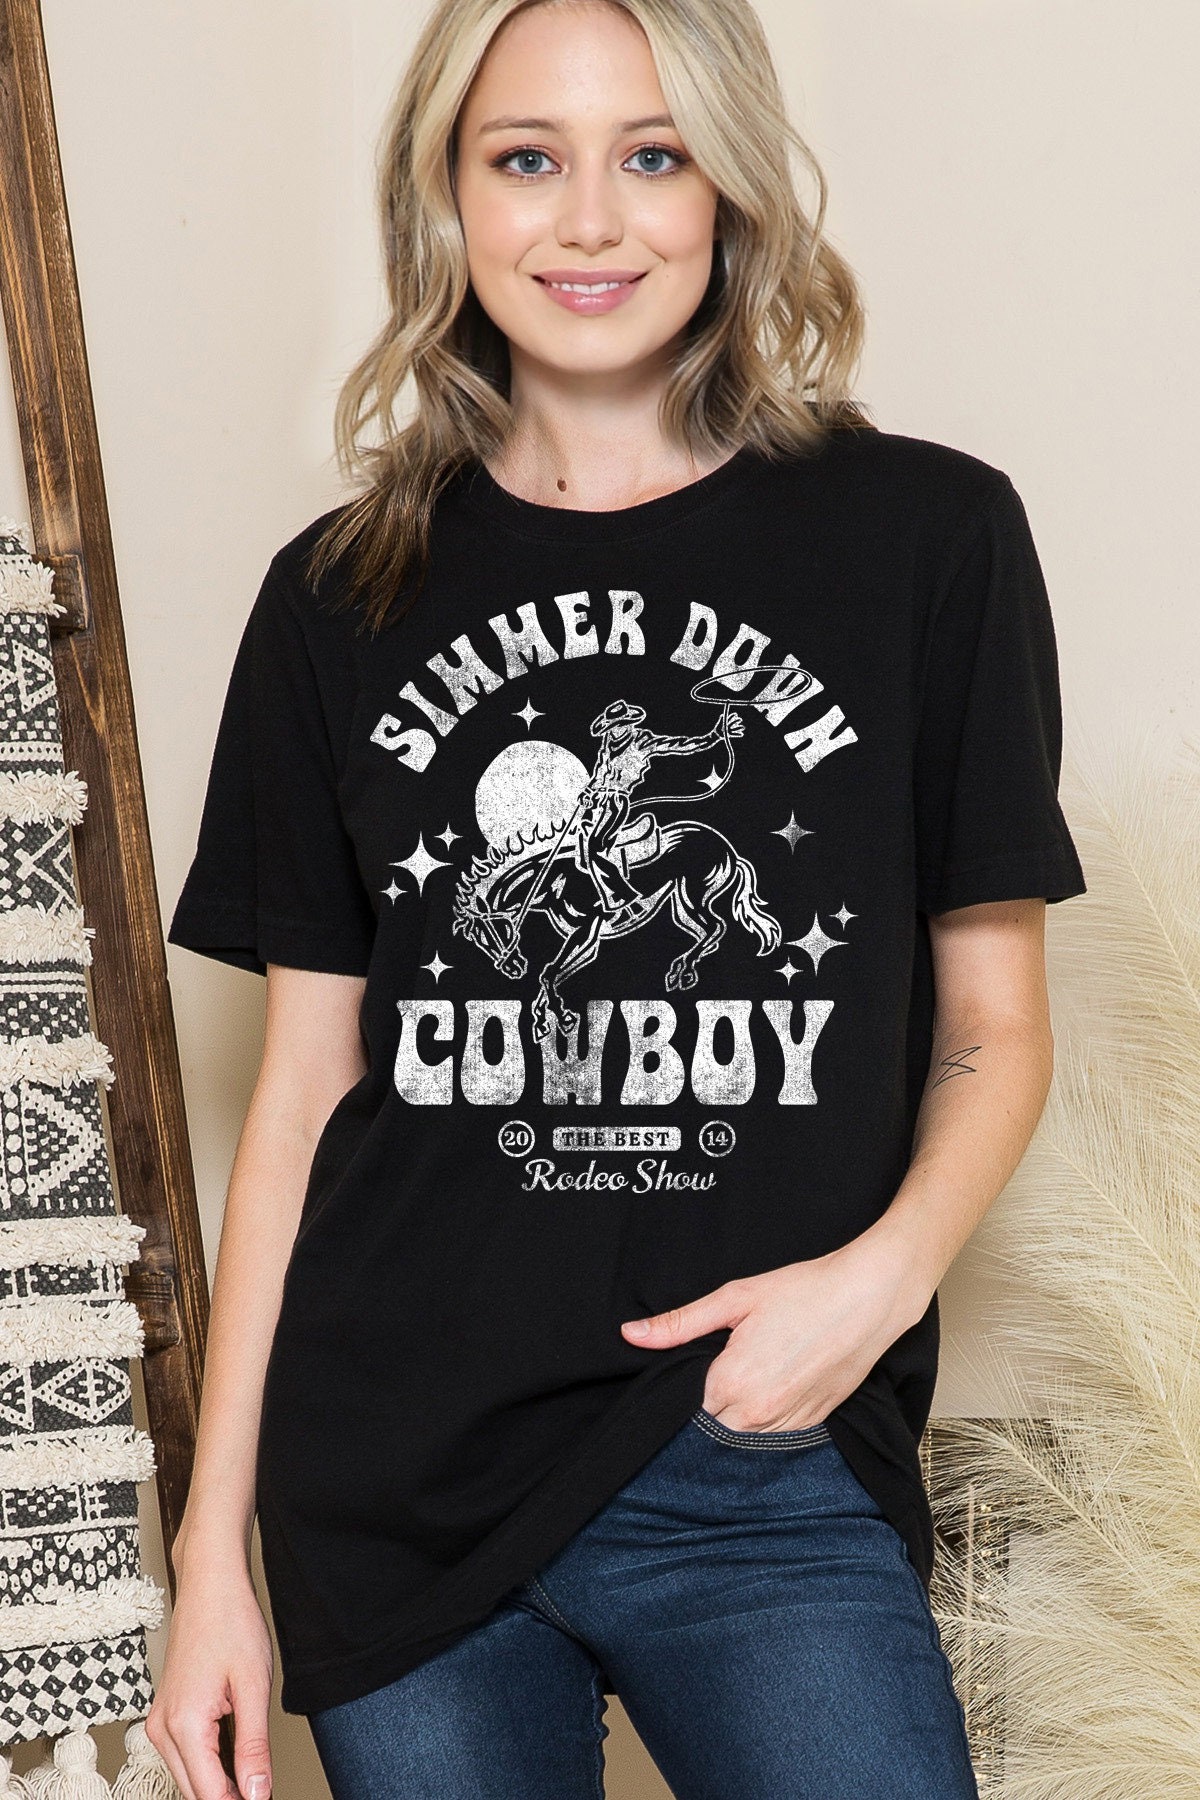 Simmer Down Cowboy Graphic Tee Country Western Shirt Rodeo - Etsy